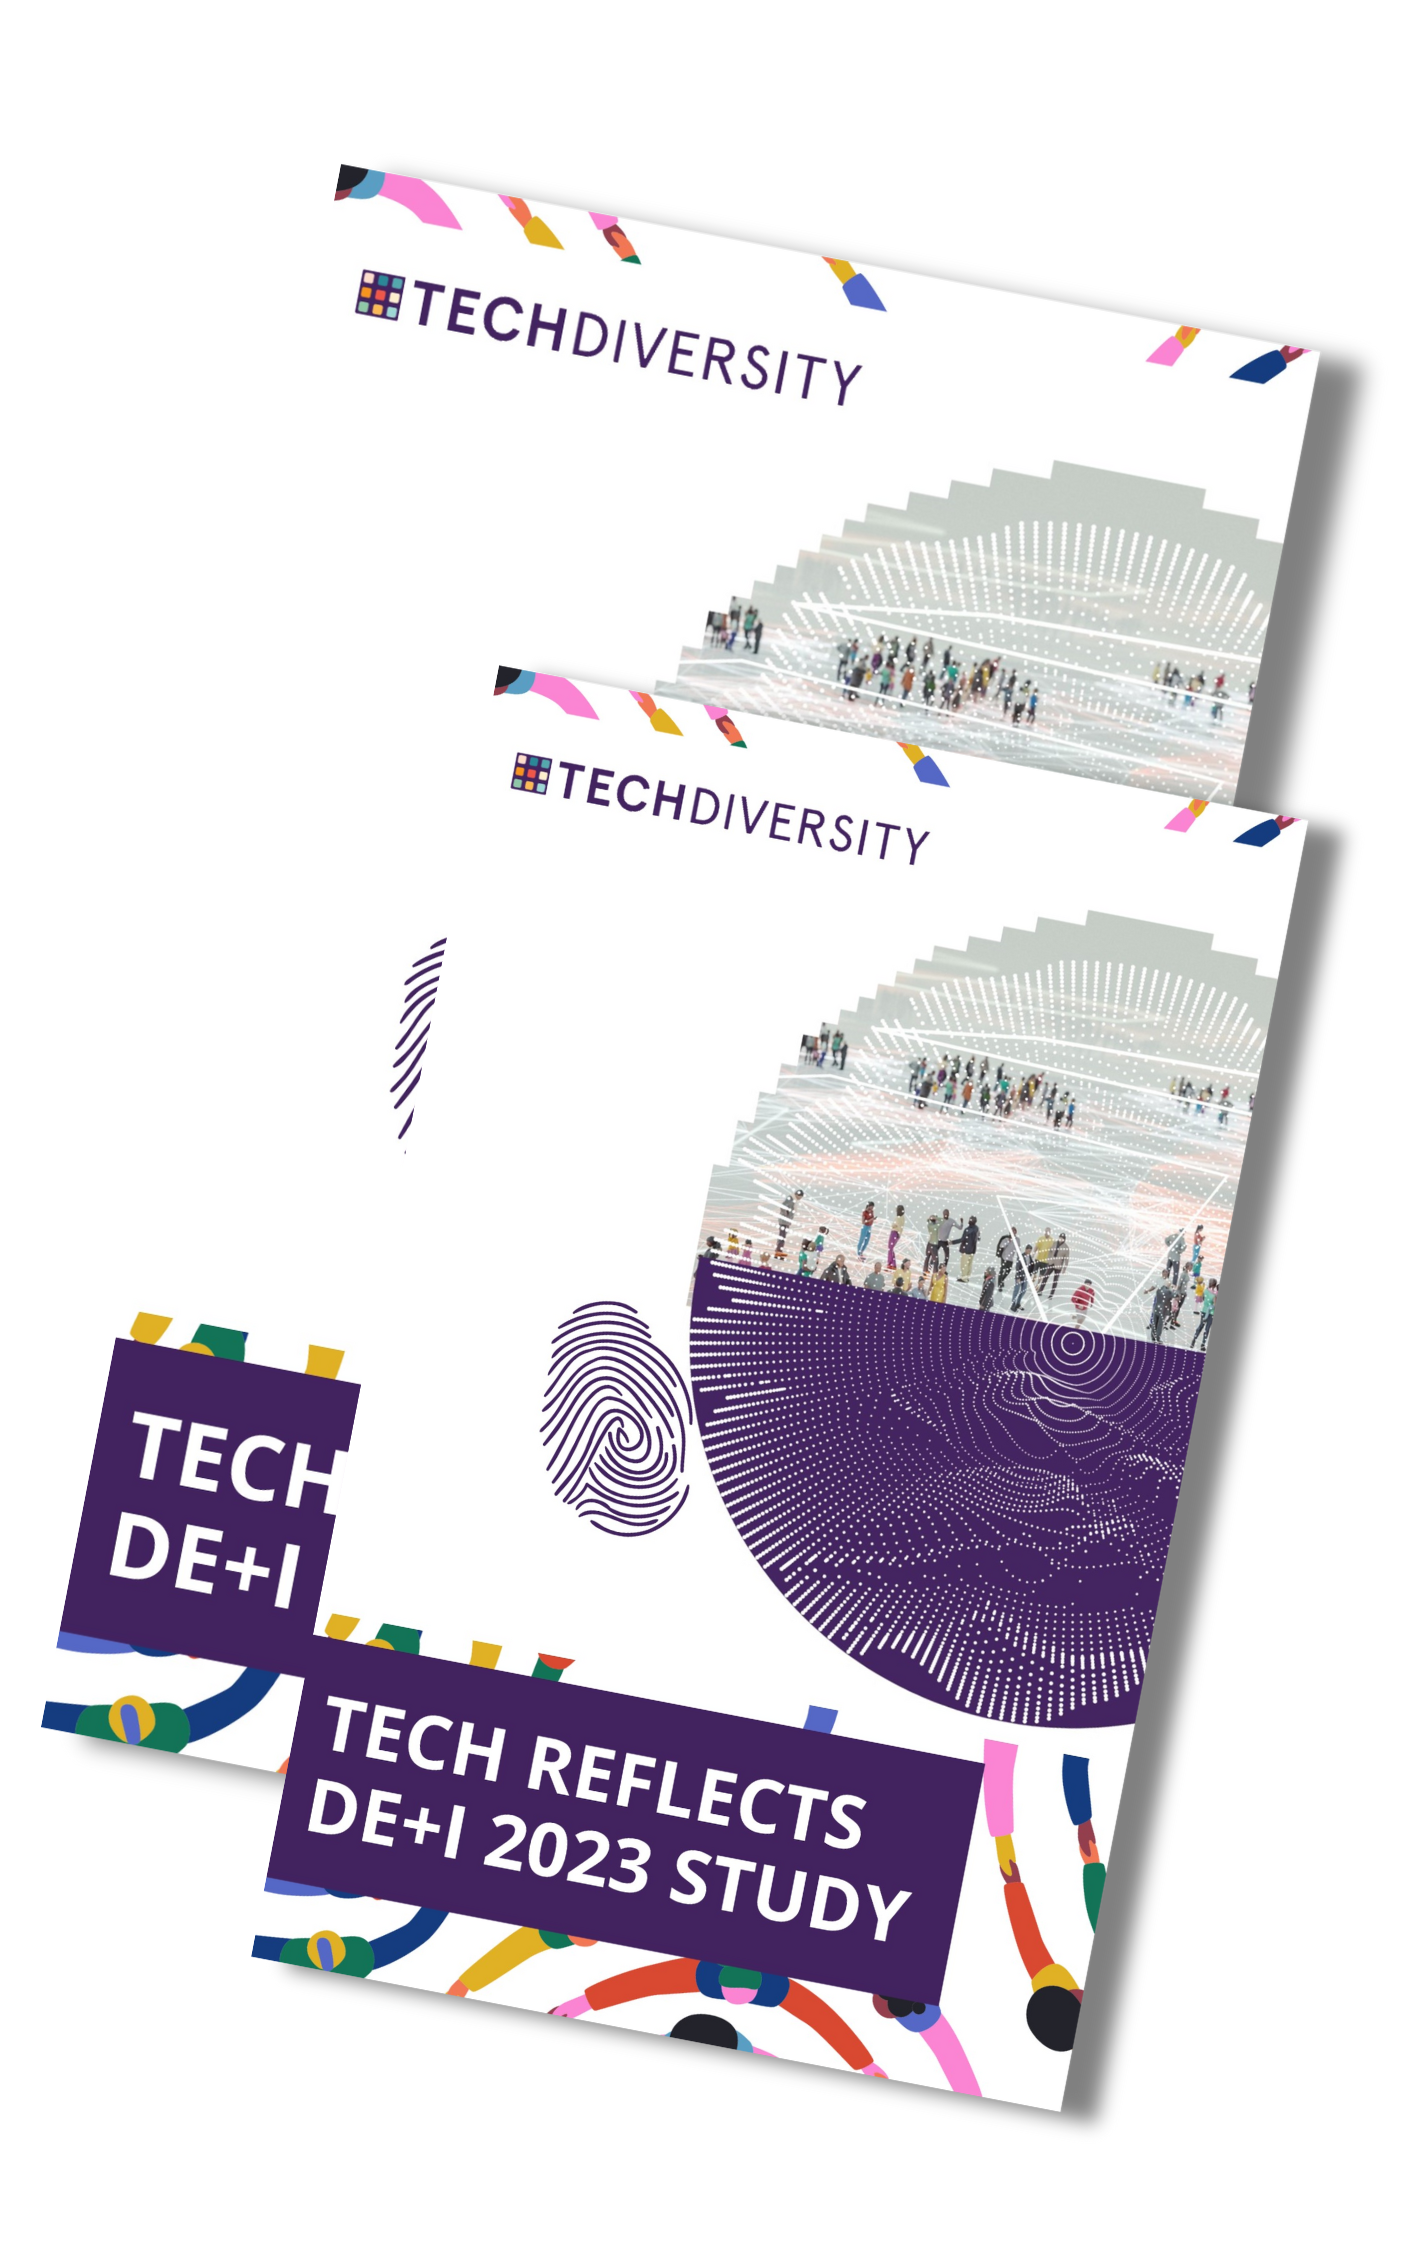 TechDiversity TechReflect Cover of Report 